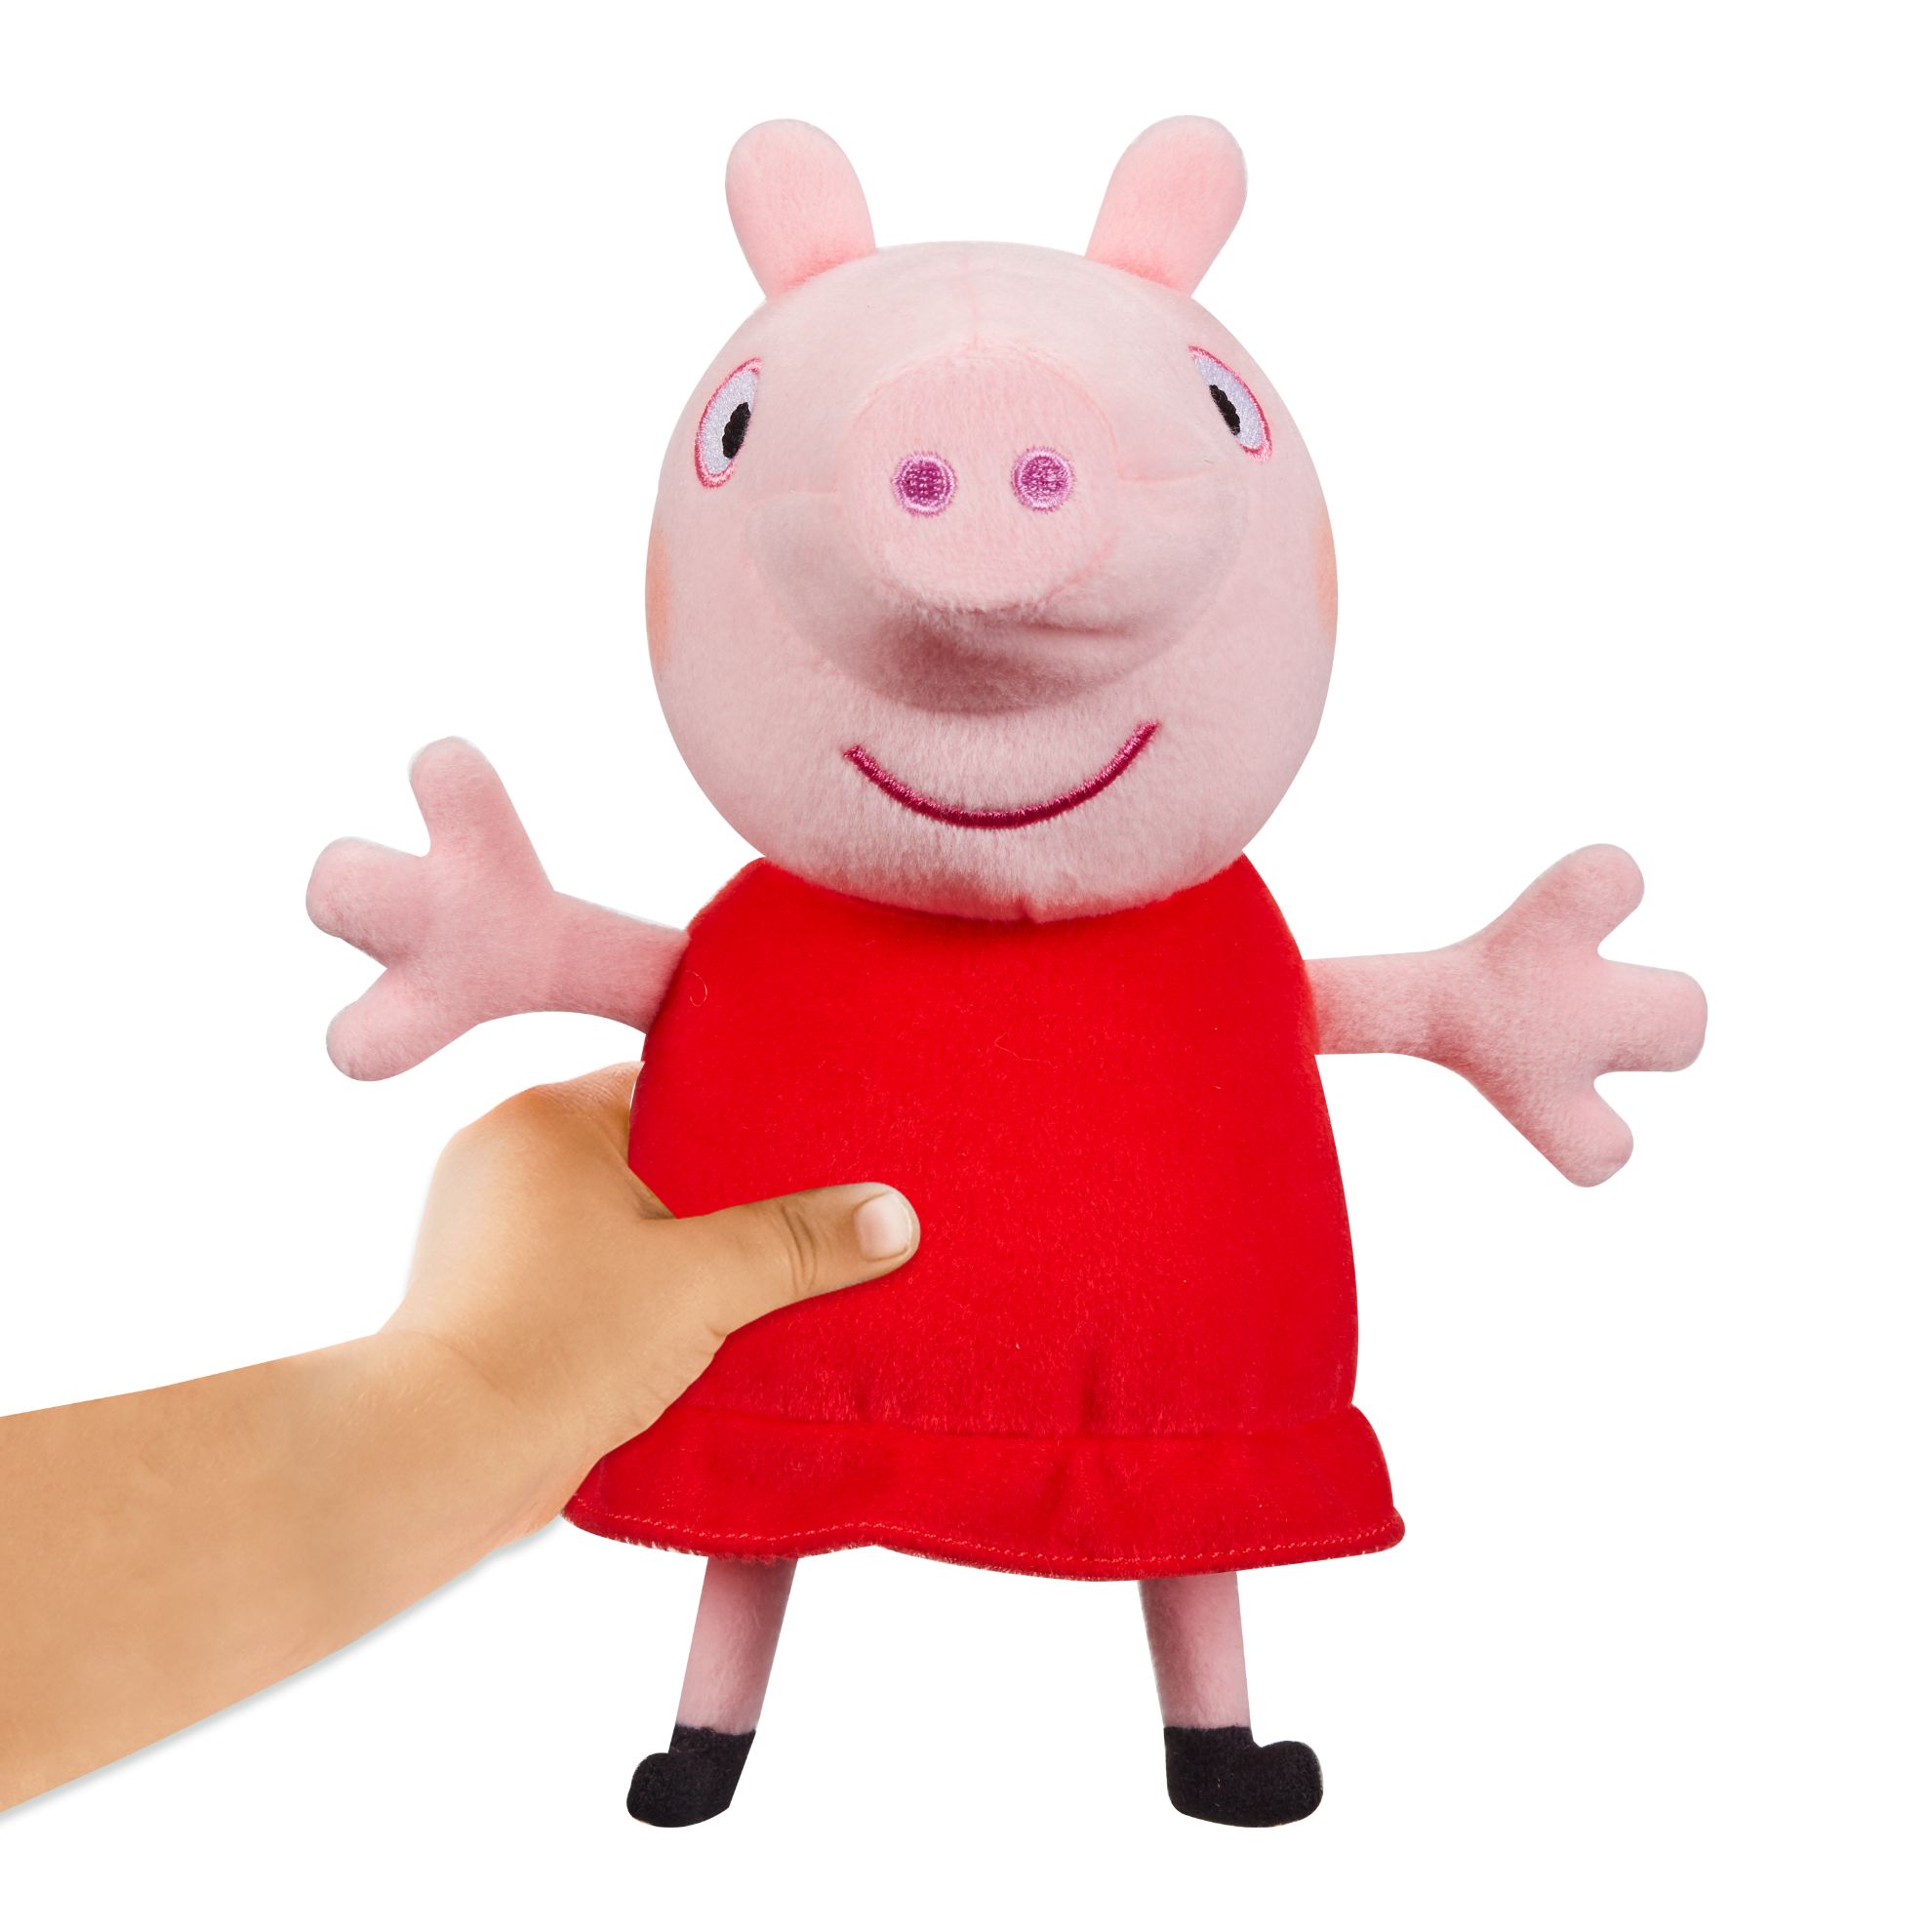 Picture of Peppa Pig - Giggle & Snort Peppa V2